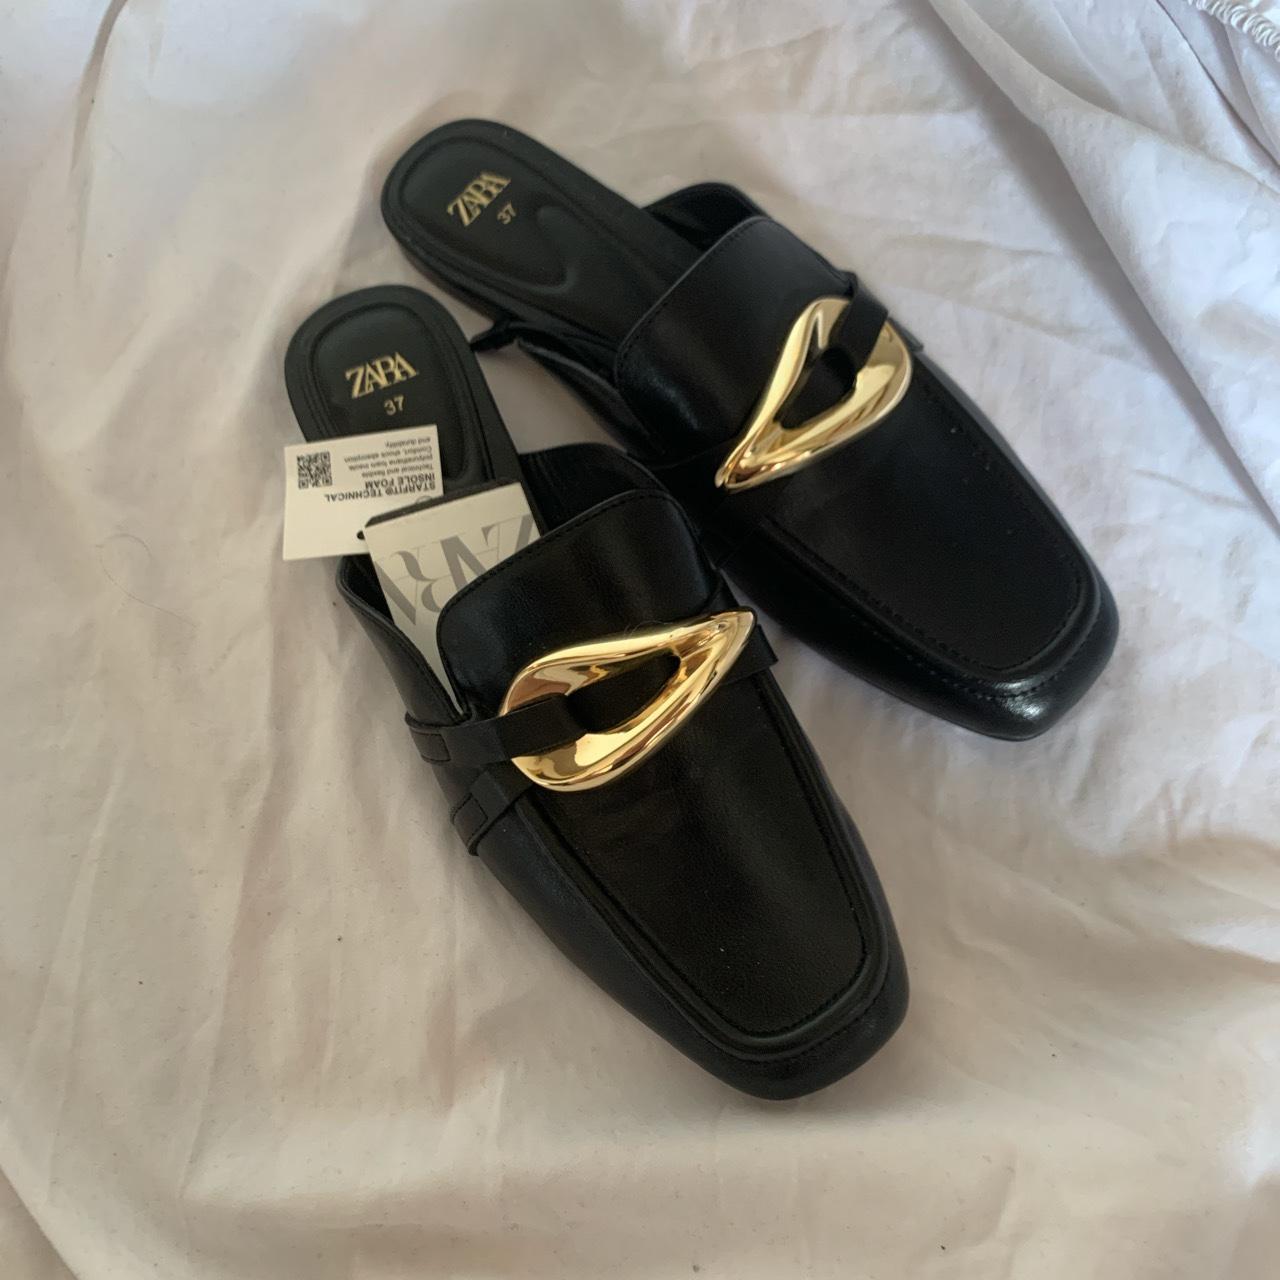 Zara Women's Black and Gold Loafers